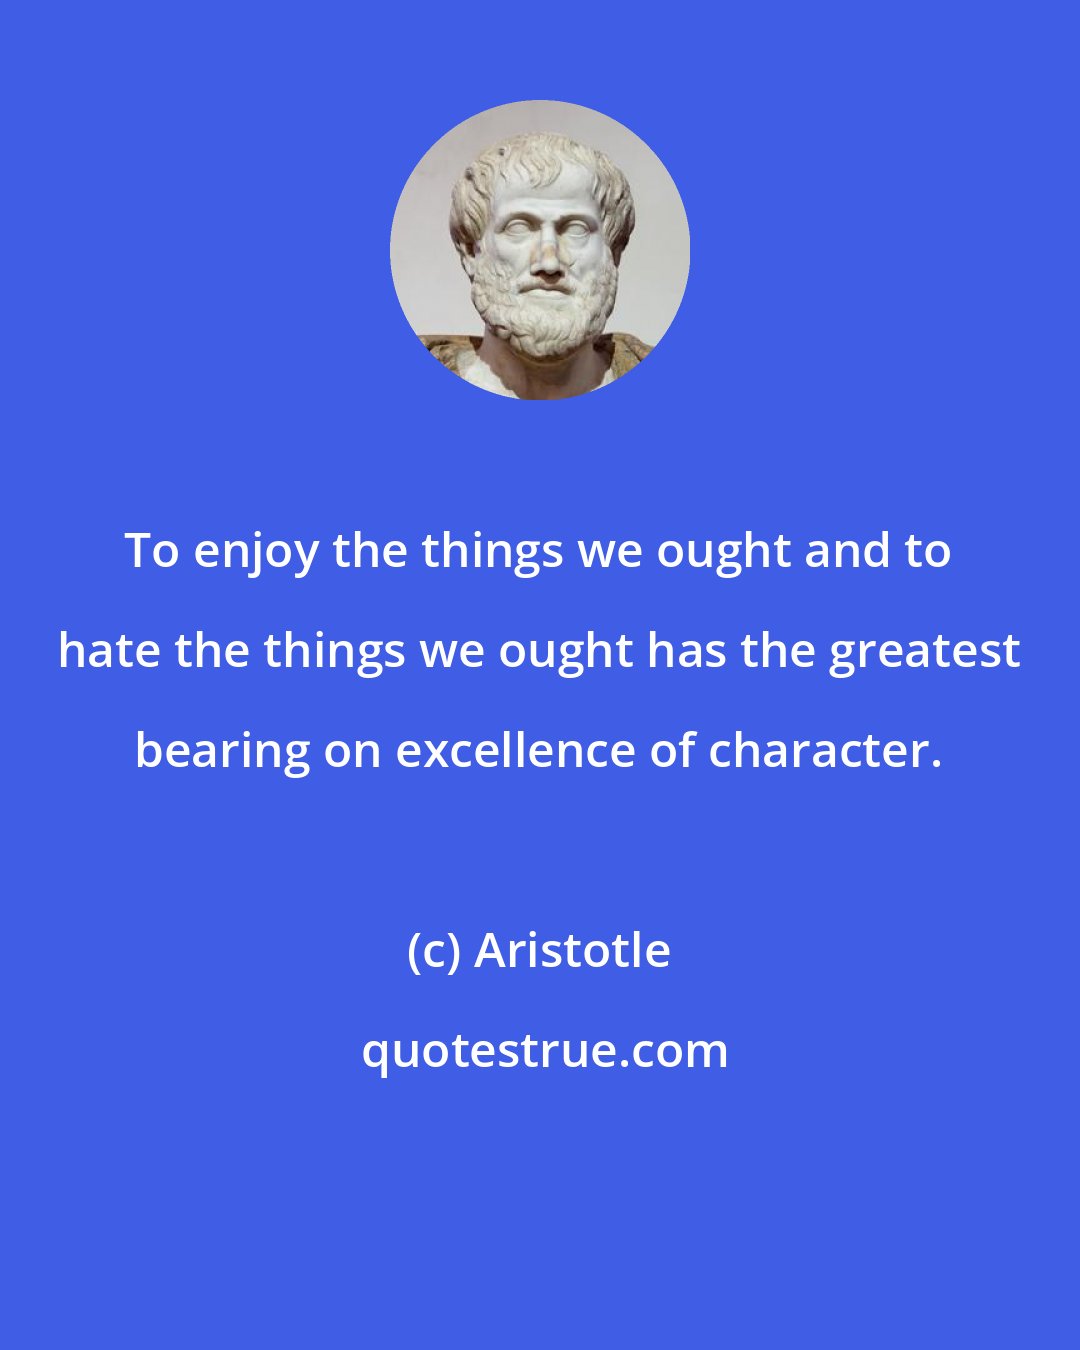 Aristotle: To enjoy the things we ought and to hate the things we ought has the greatest bearing on excellence of character.